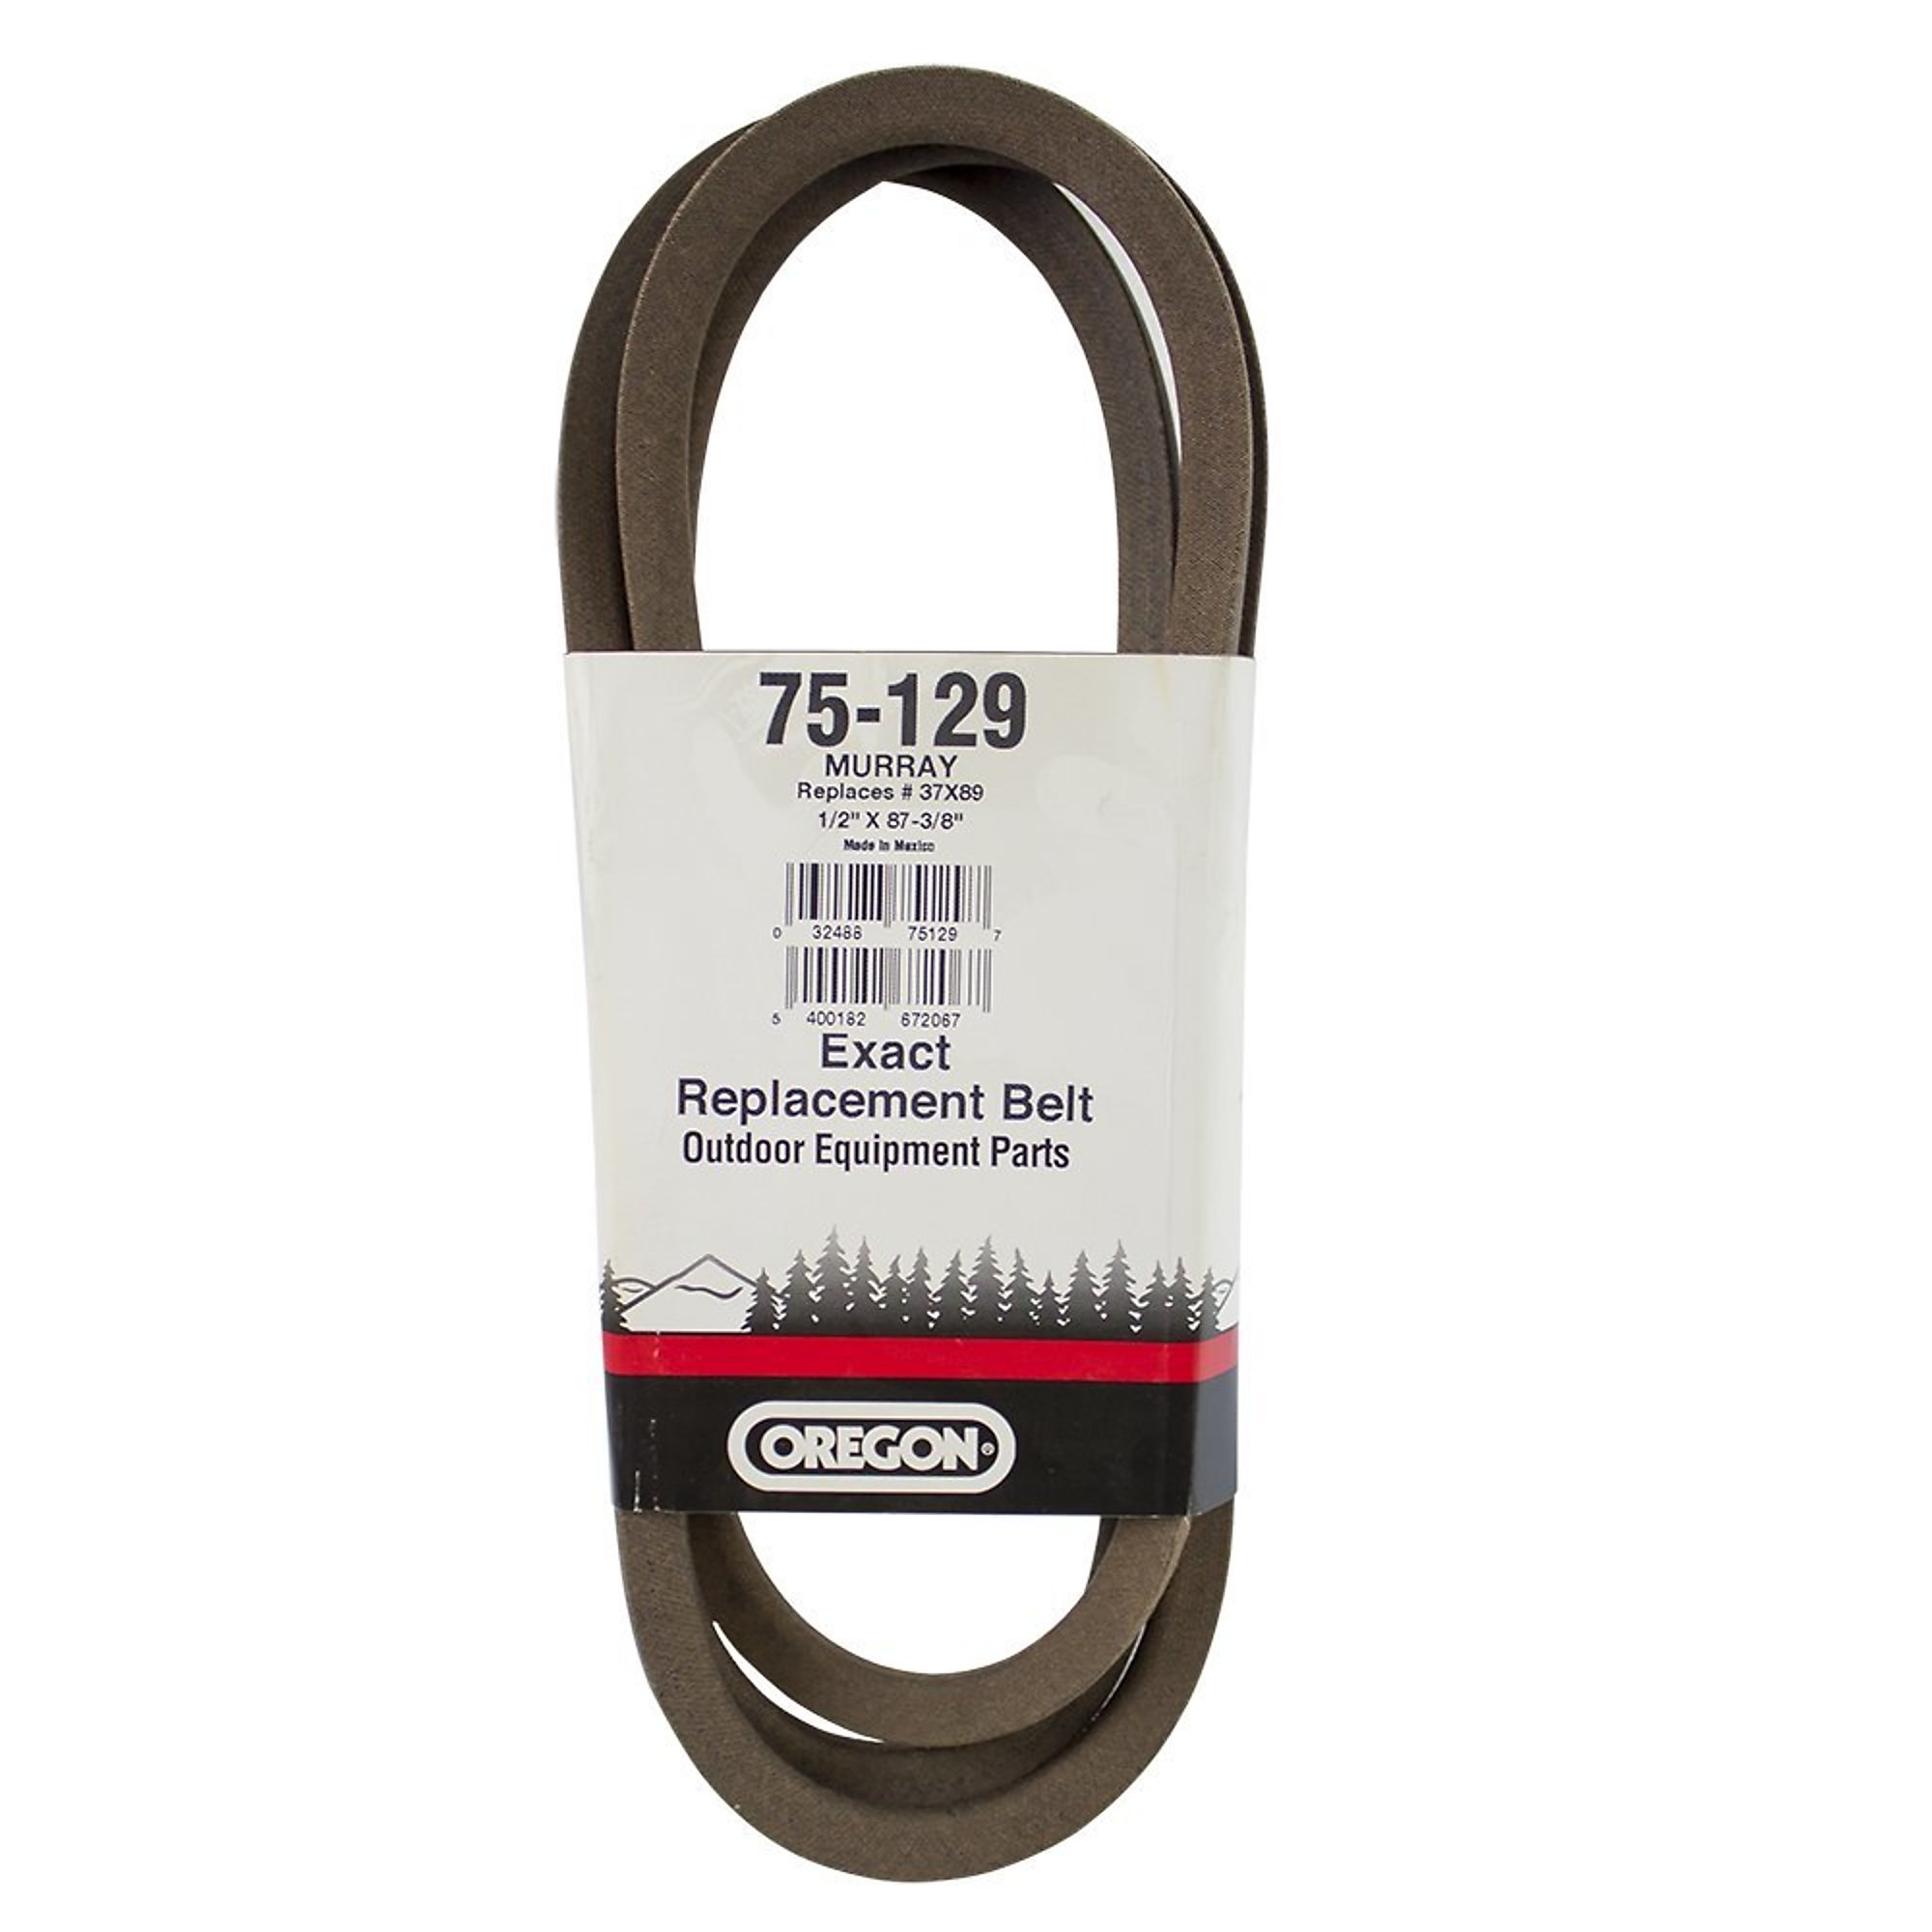 Oregon, Belt, Premium Replacement, Murray and more, Length 87.38 in, Width 1/2 in, Model 75-129